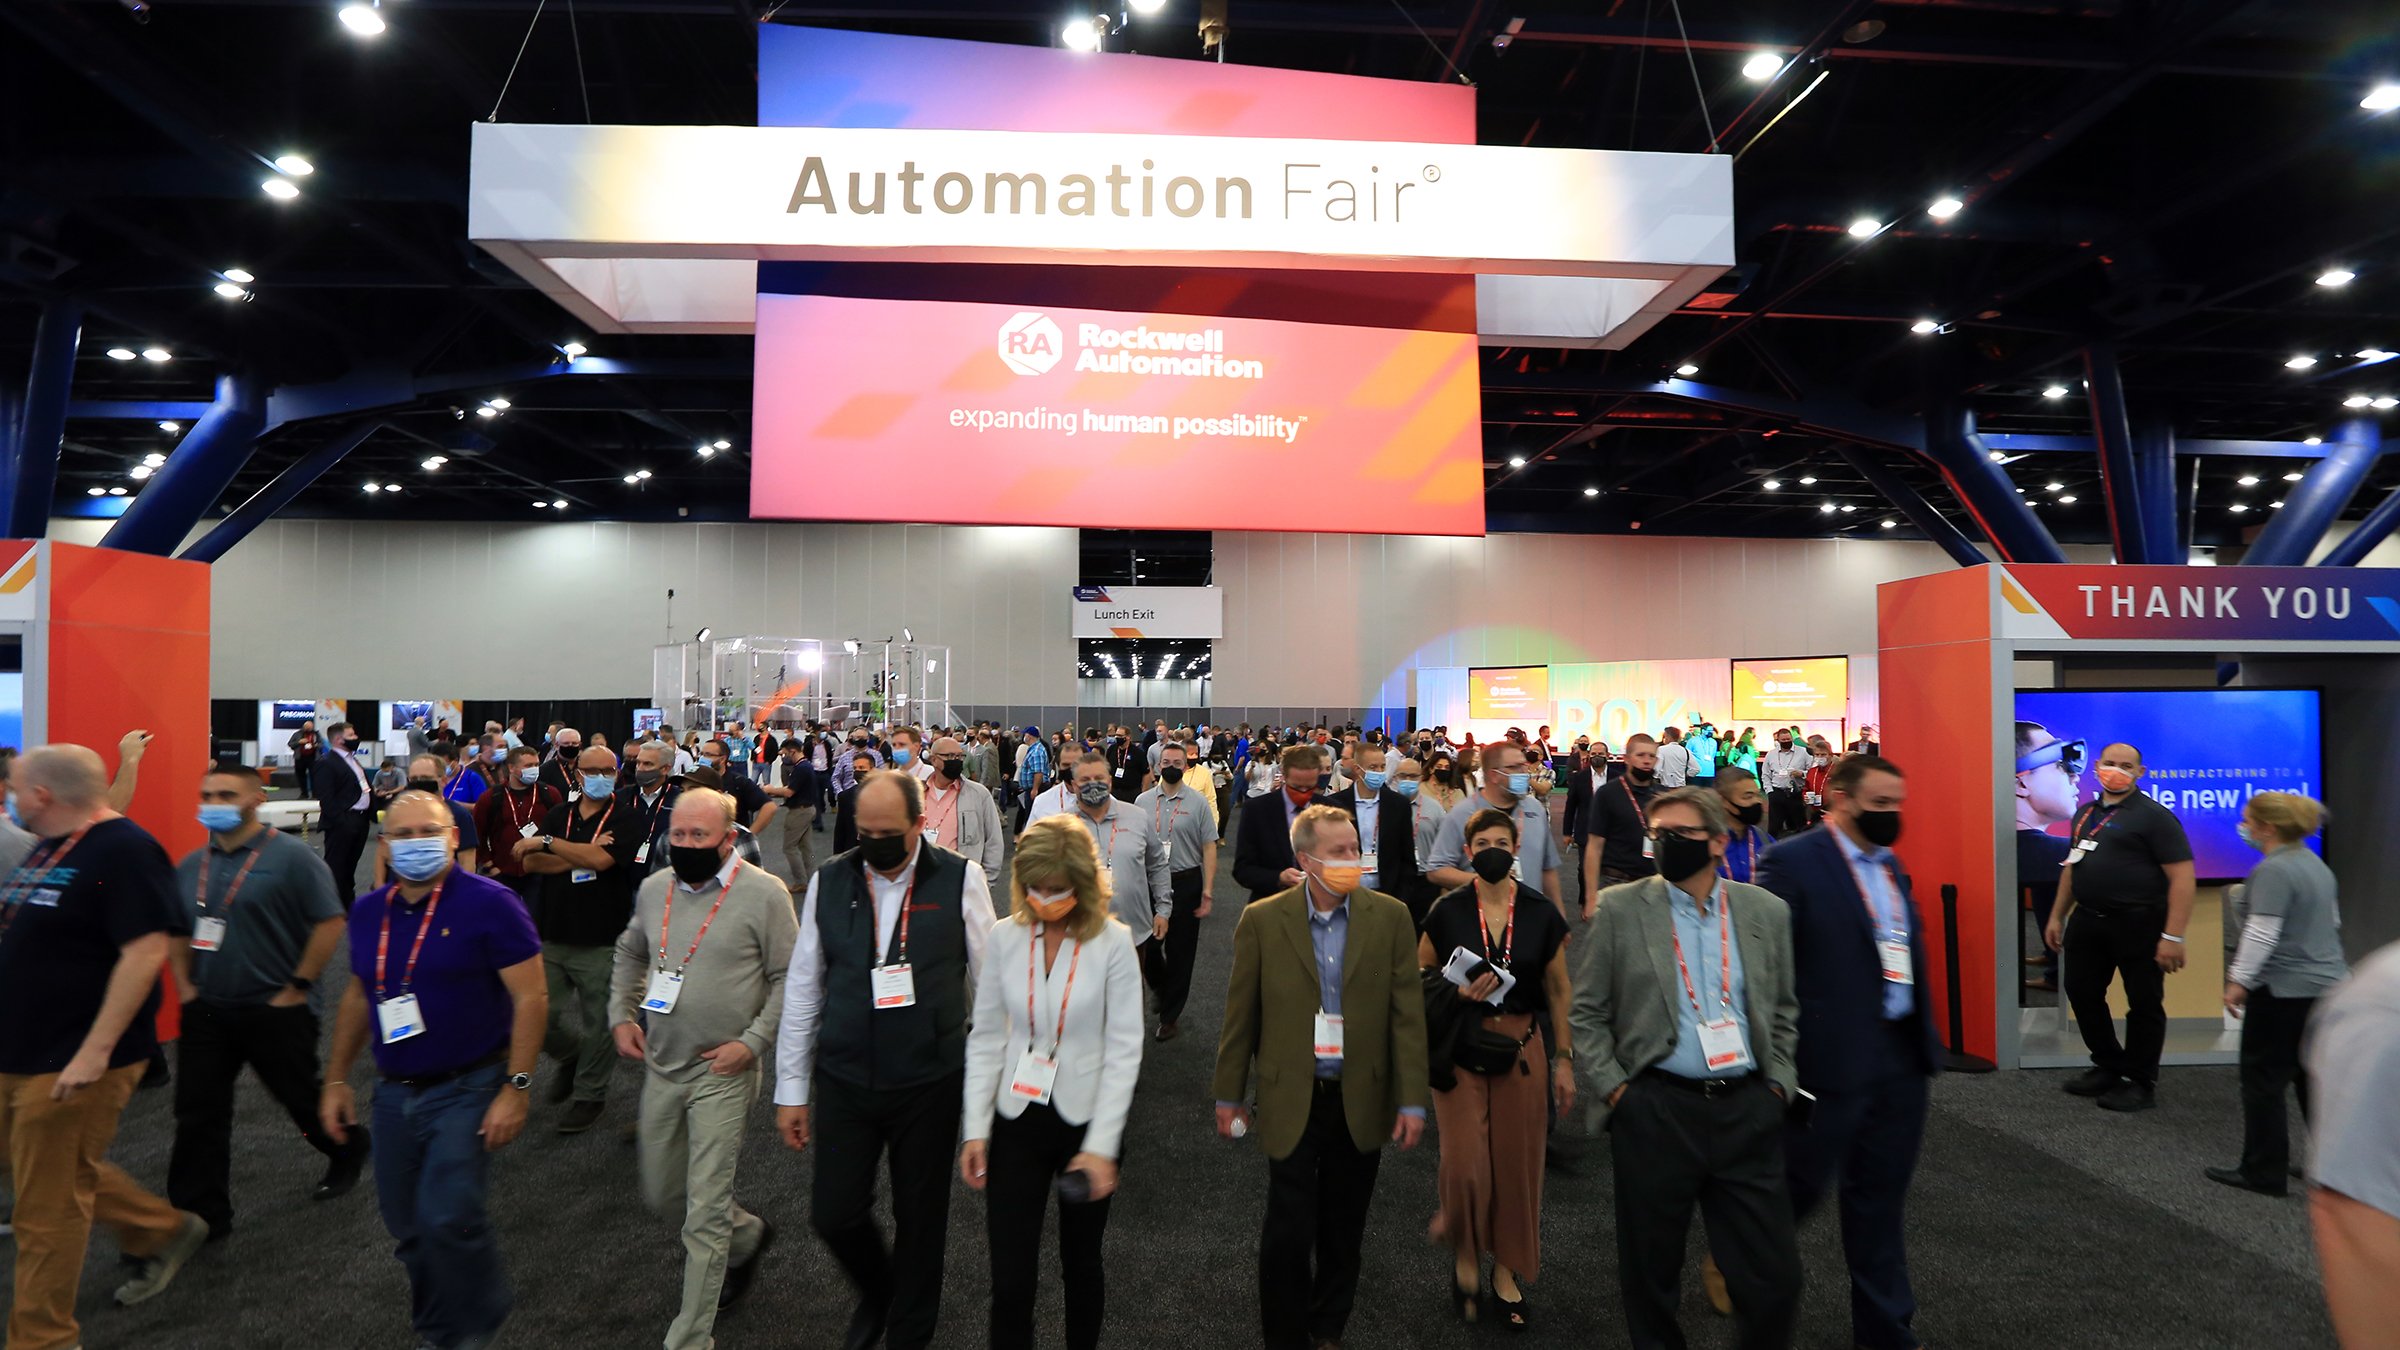 Automation Fair opens in Houston TX